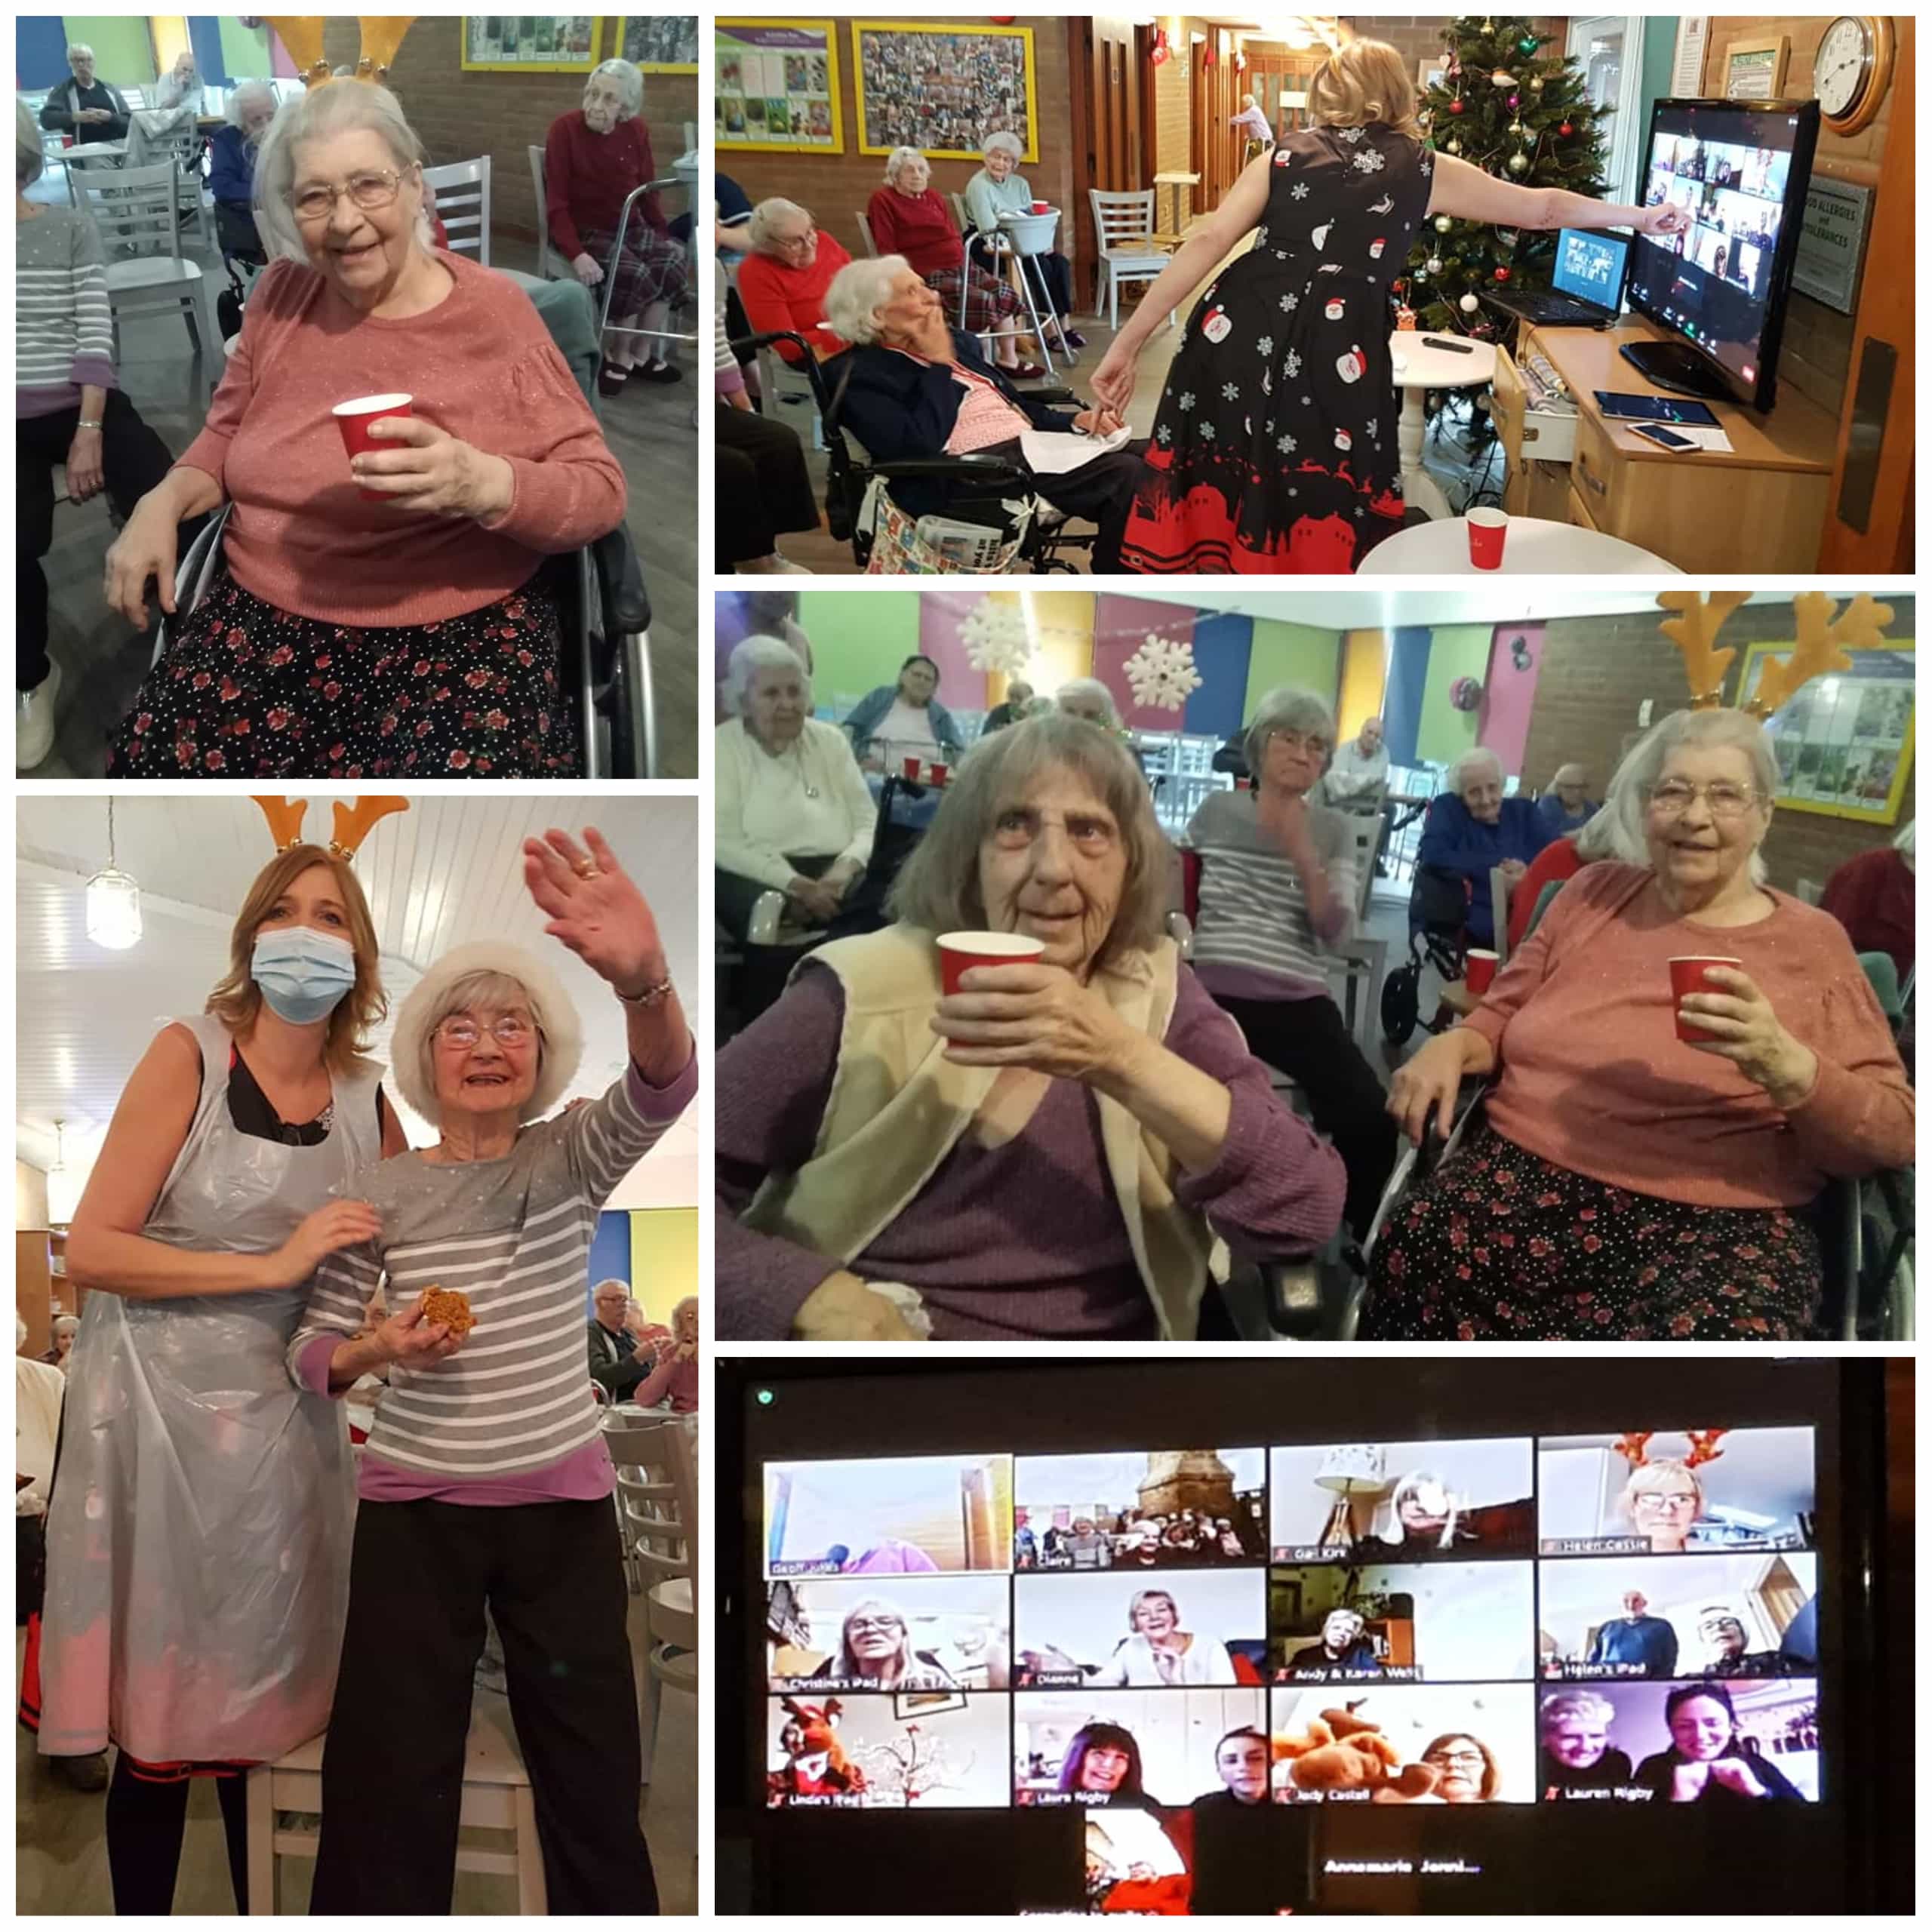 The Badgers Wood Care Home residents enjoying their virtual Christmas party.